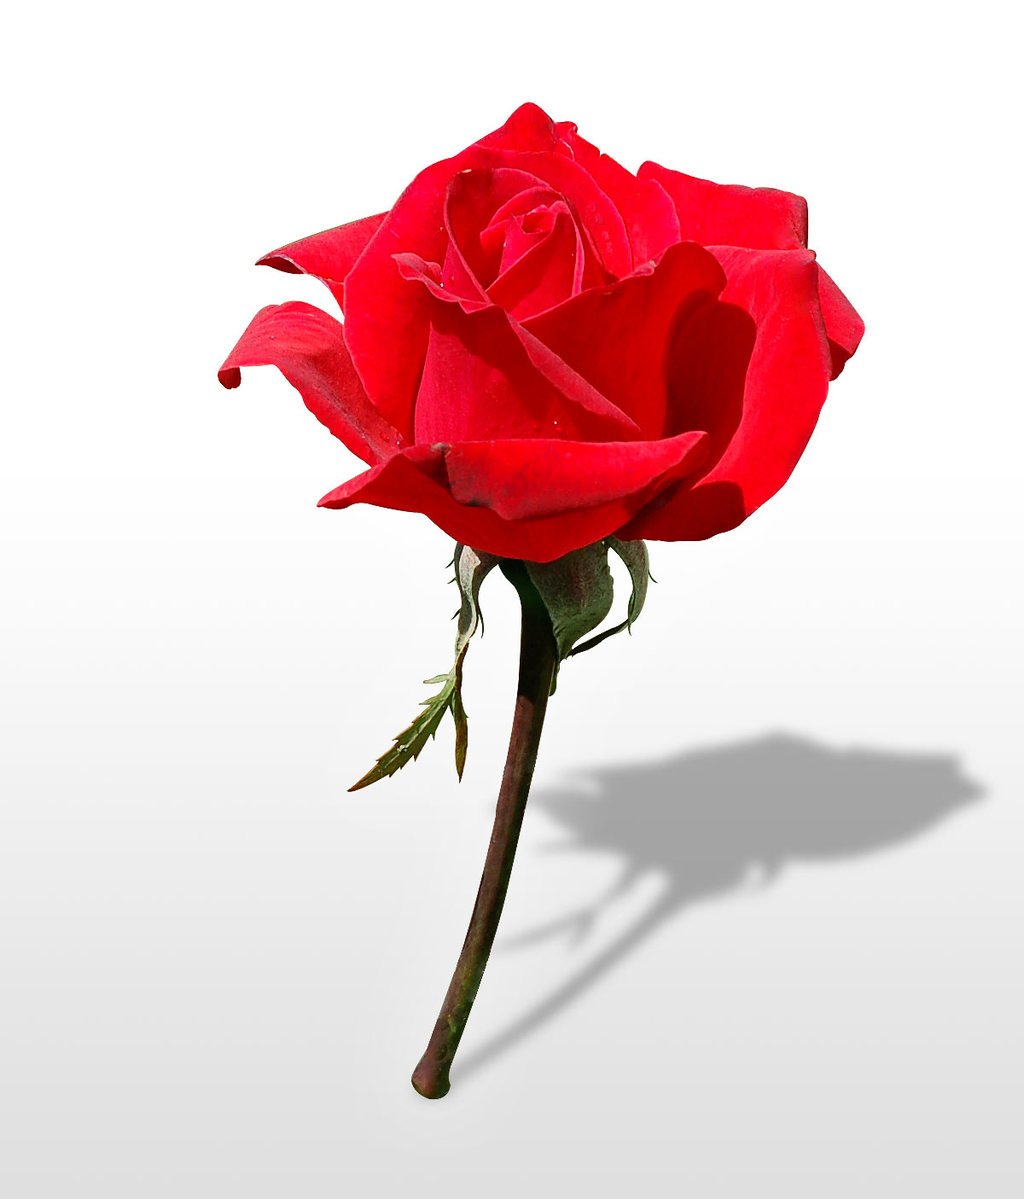 there is a single red rose in the white background